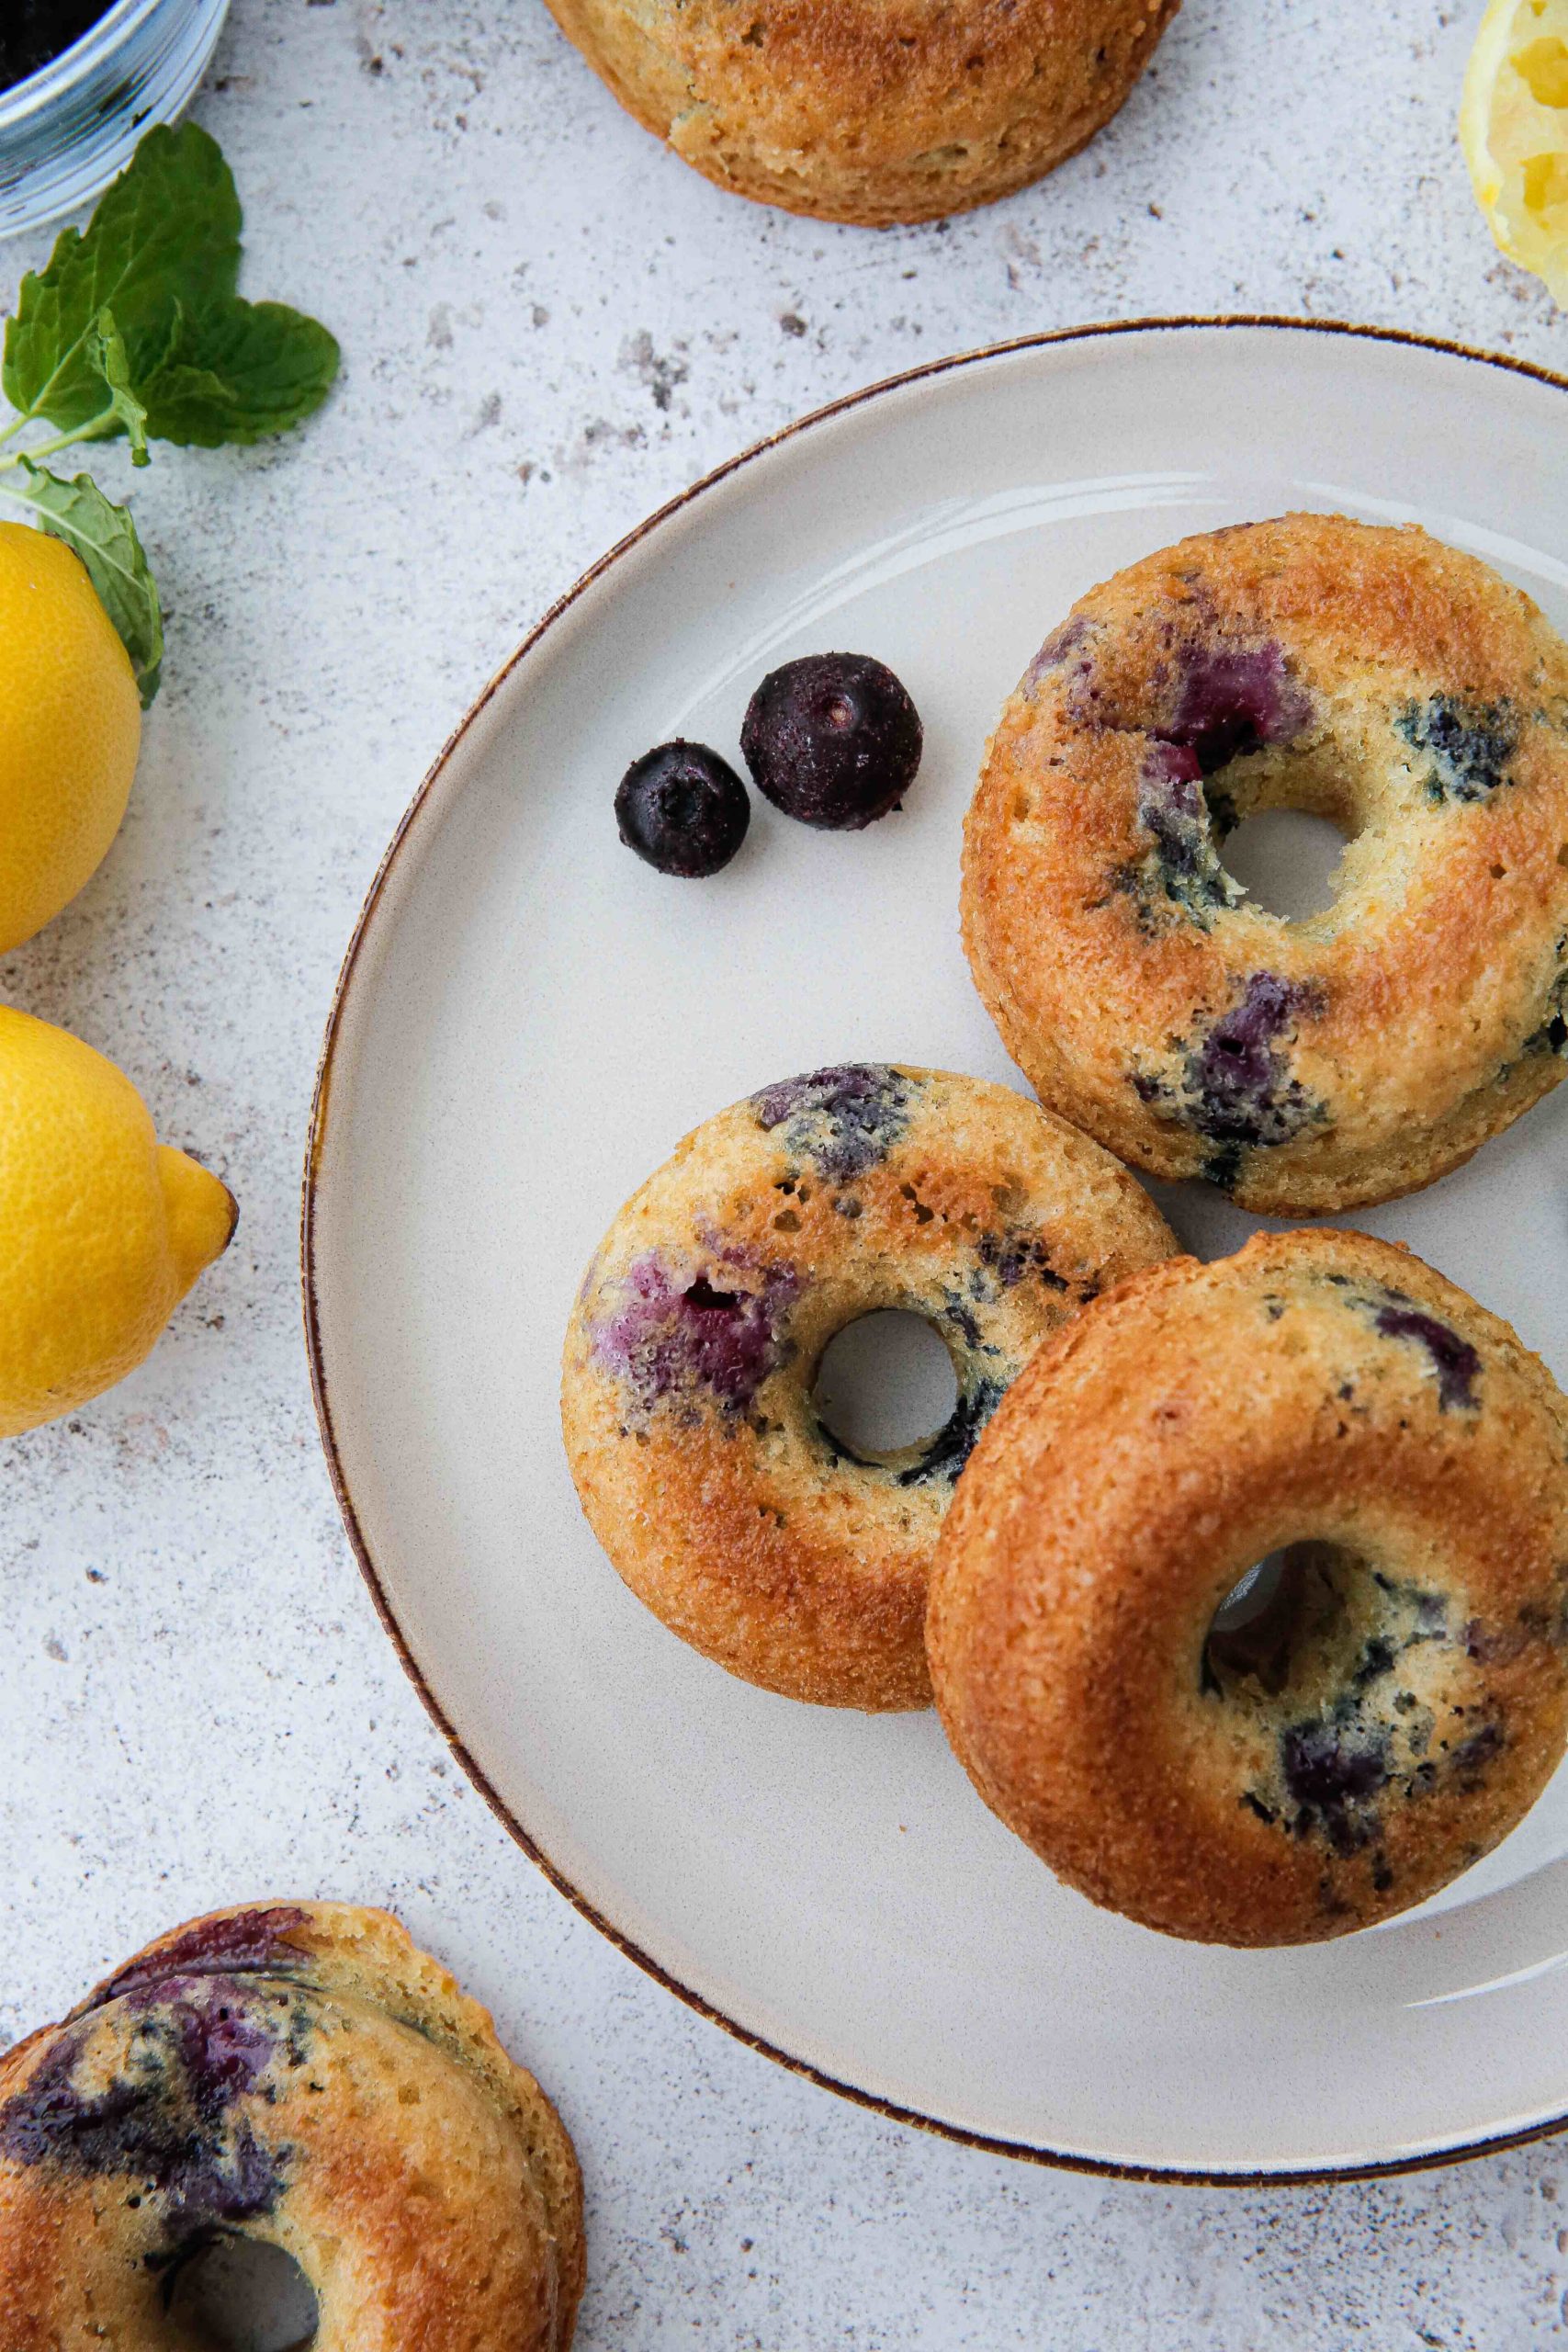 These baked donuts, flavoured with lemon and studded with juicy blueberries are squidgy perfection! They're non yeast, more cake donuts which means they're super simple and quick to make. Absolutely delicious warm or cold with a cuppa for breakfast or an afternoon vegan treat! Recipe on thecookandhim.com #vegandonut #bakeddonuts #homemadedonuts #cakedonuts